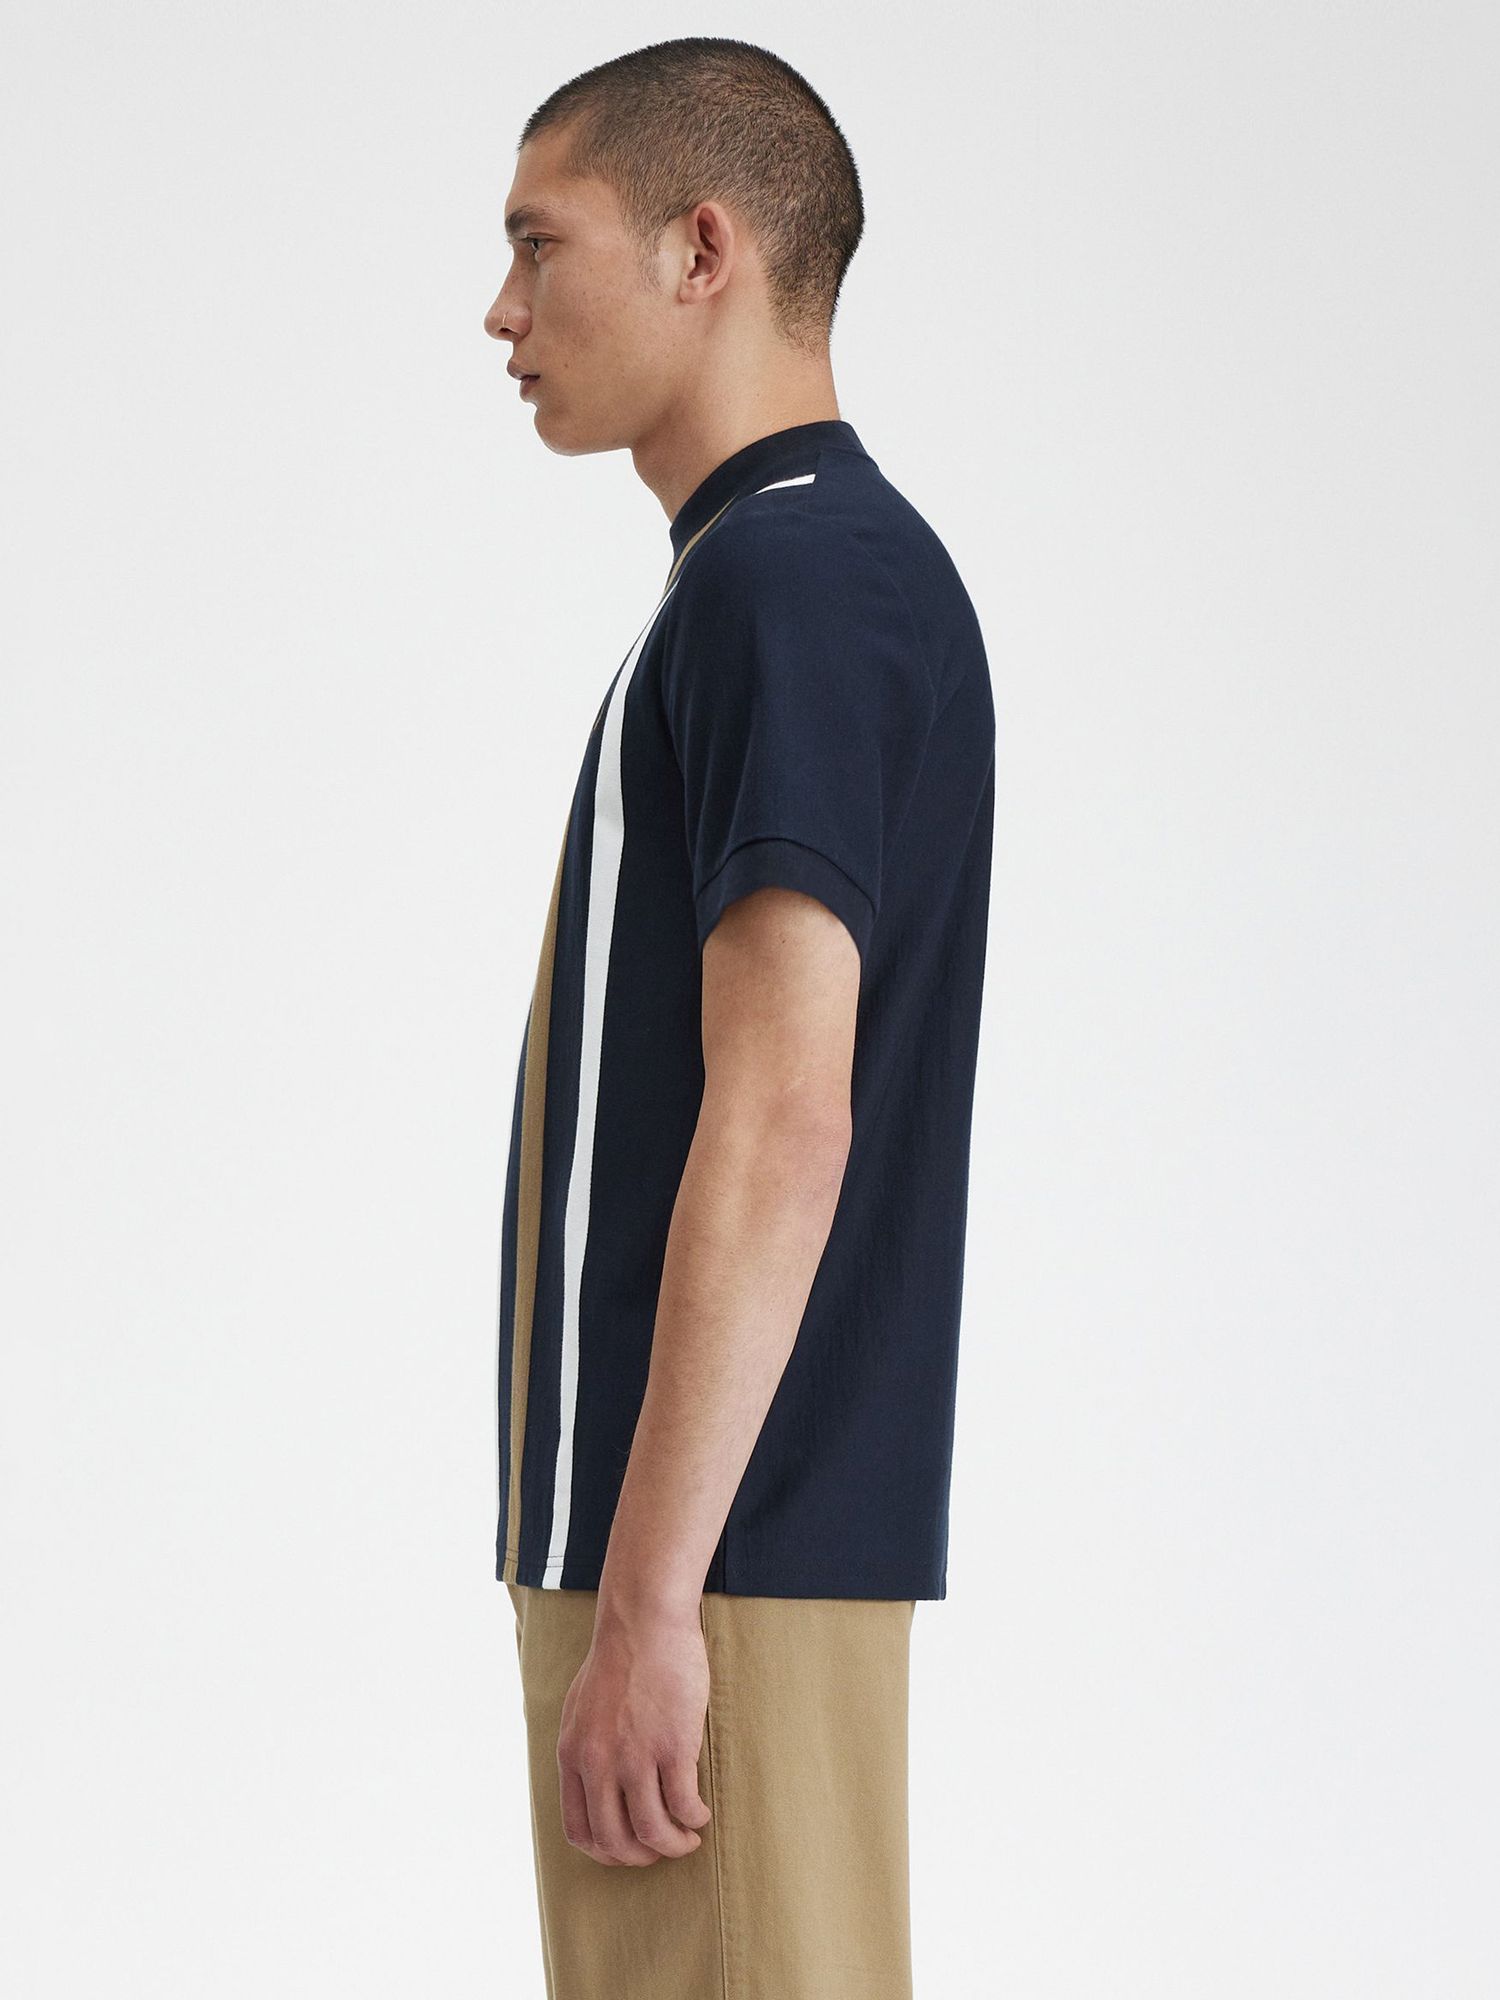 Buy Fred Perry Grad Stripe T-Shirt, Navy/Multi Online at johnlewis.com